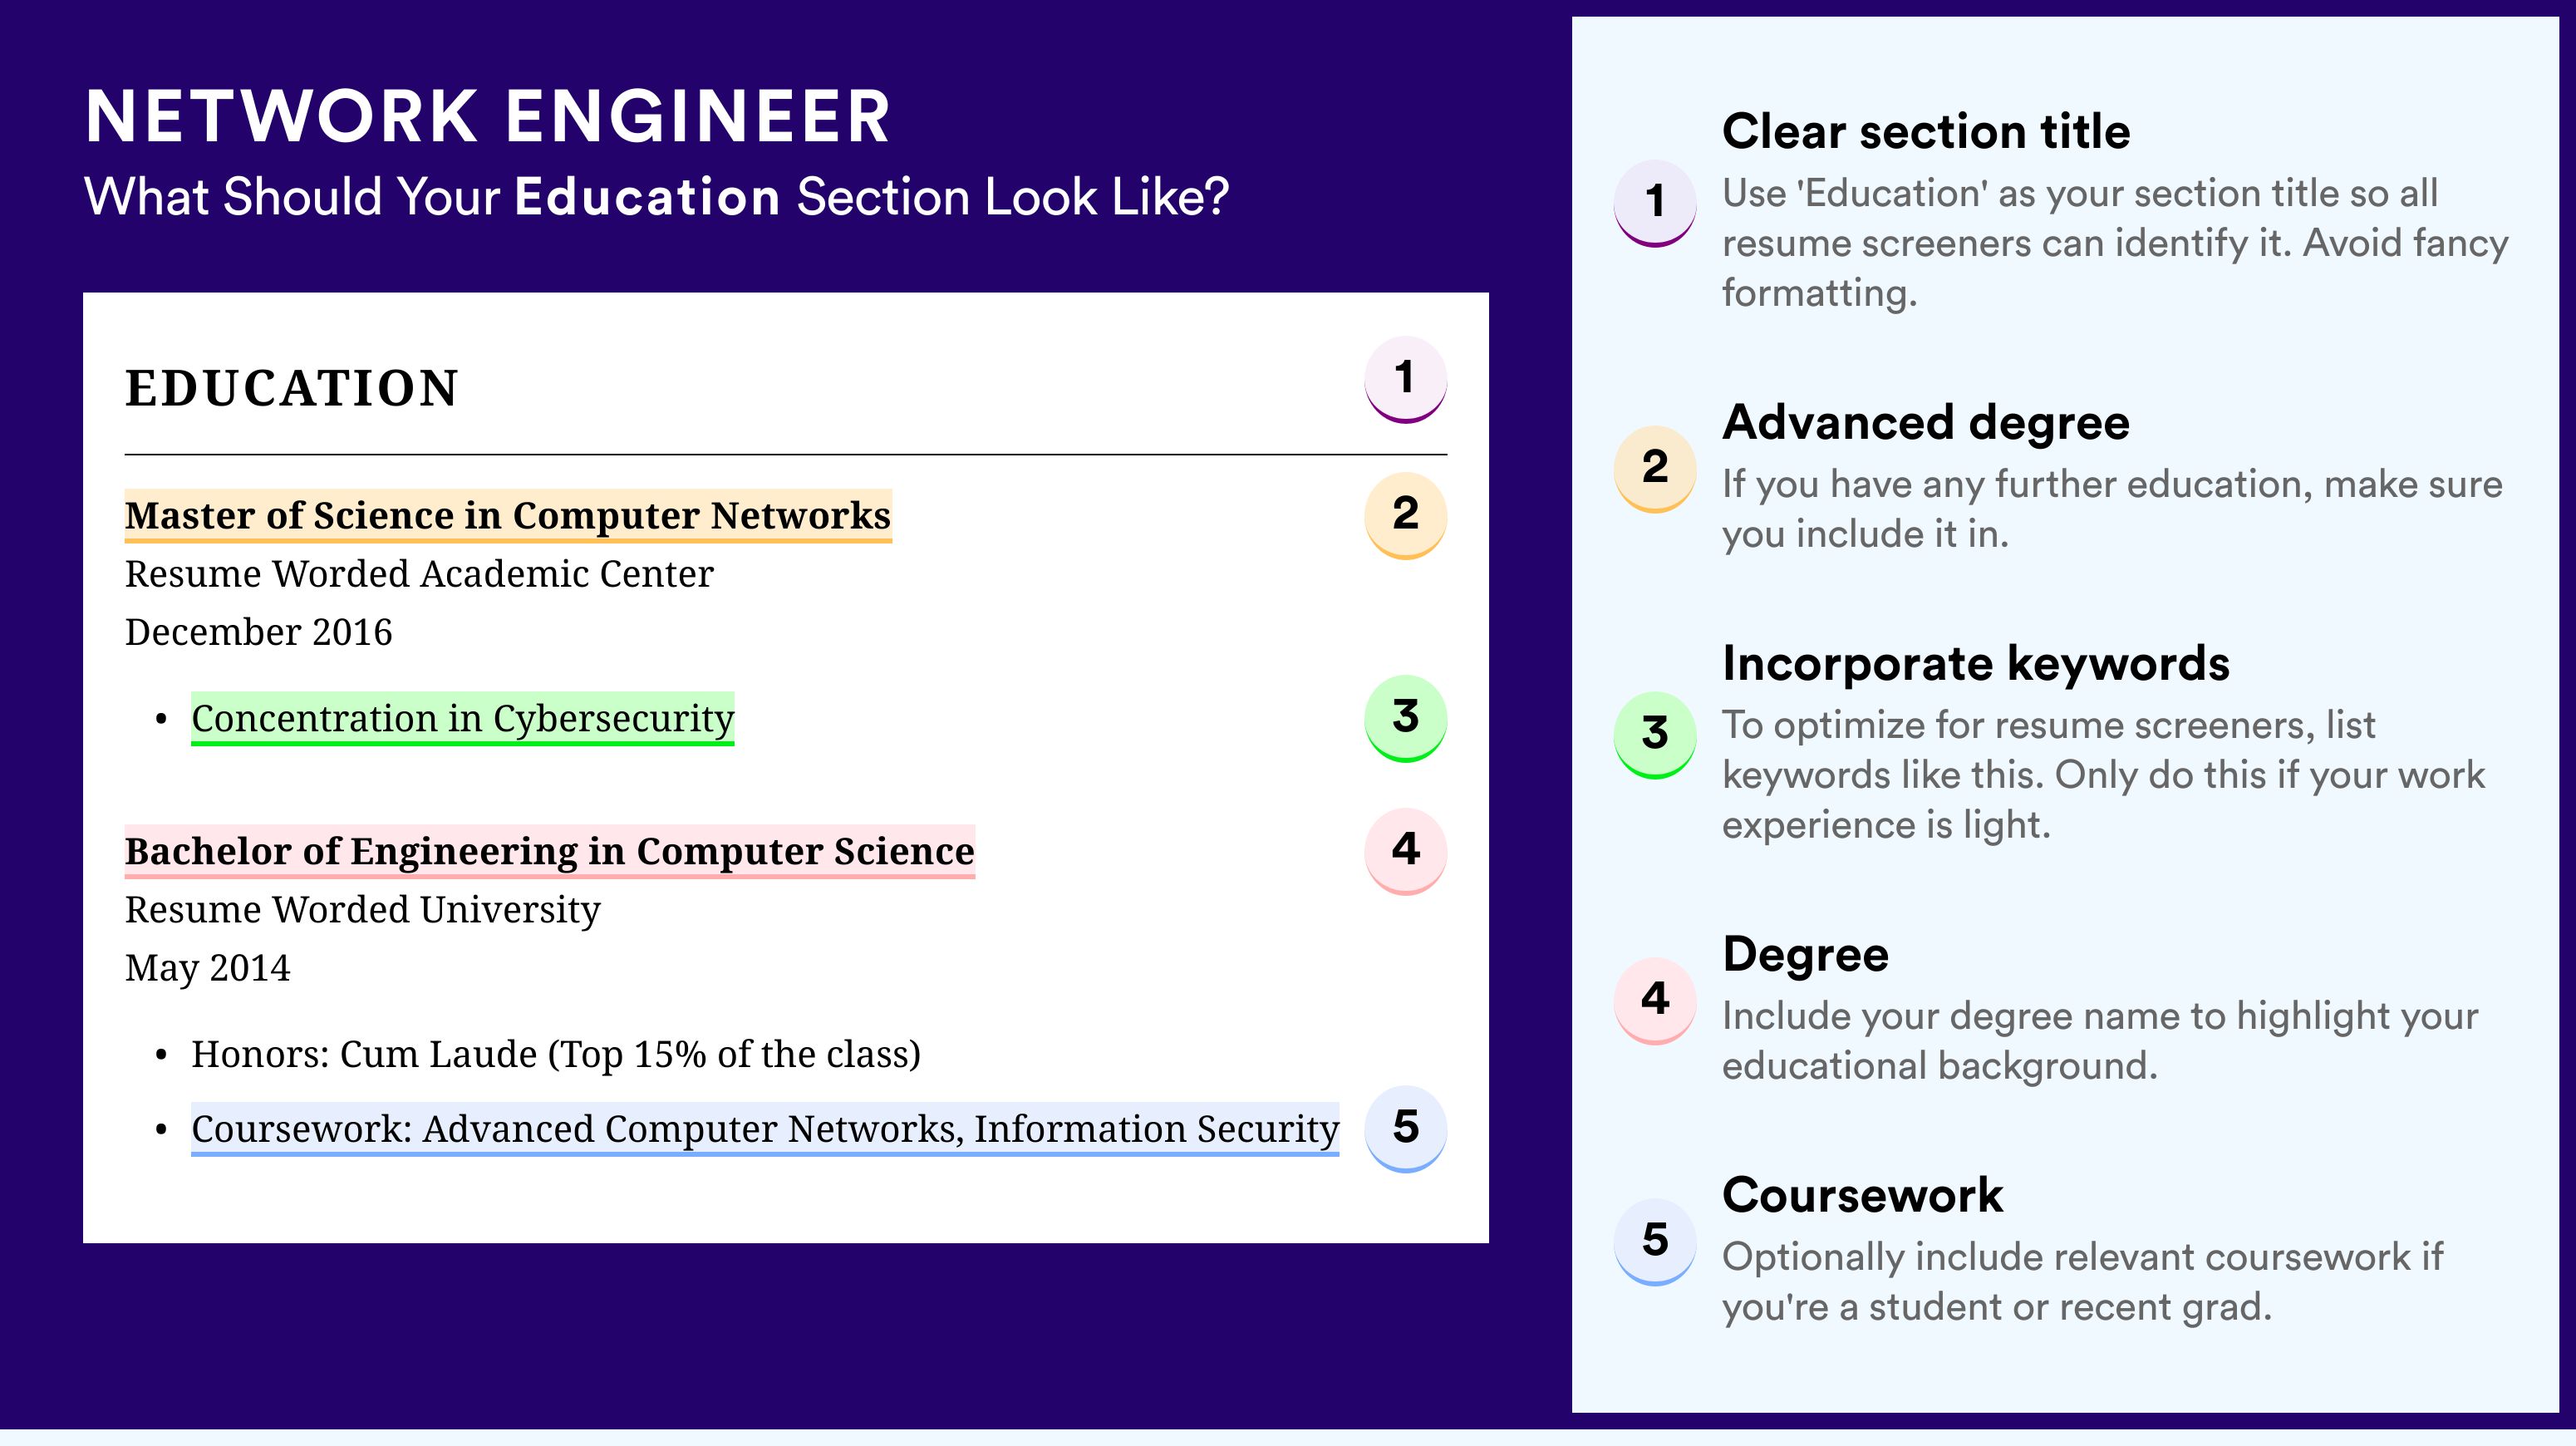 How To Write An Education Section - Network Engineer Roles